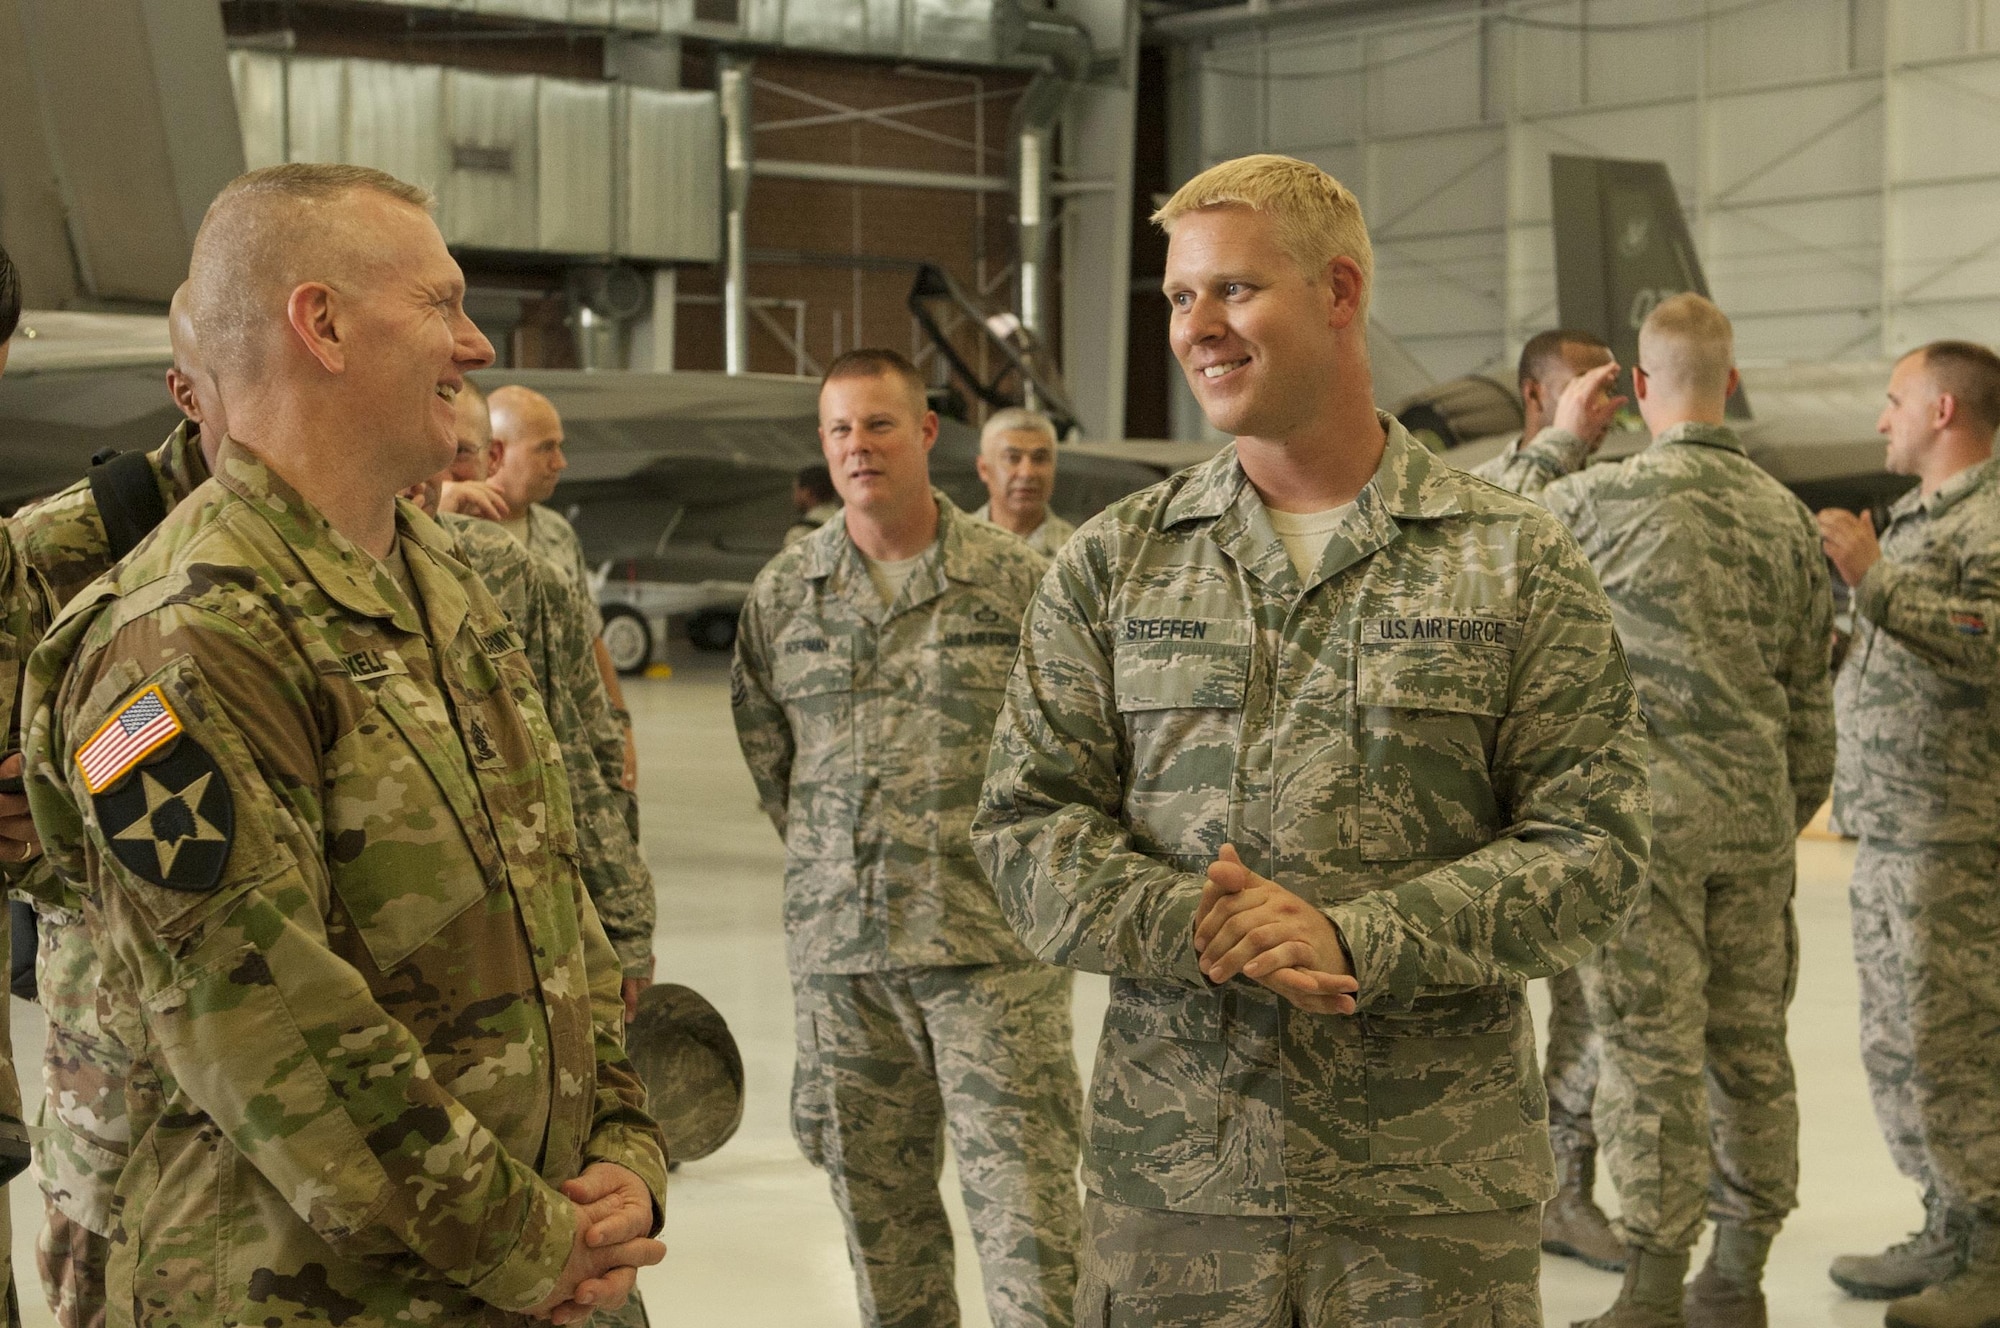 Army Command Sgt. Maj. John Troxell (left), Senior Enlisted Advisor to the Chairman of the Joint Chiefs of Staff, speaks with Airmen from the 57th Maintenance Group during a Nellis Air Force Base, Nev. visit July 10, 2017.  One of Troxell’s many duties as SEAC is to monitor the pulse of the joint enlisted force by identifying trends in morale and readiness. (U.S. Air Force photo by Senior Airman Joshua Kleinholz)